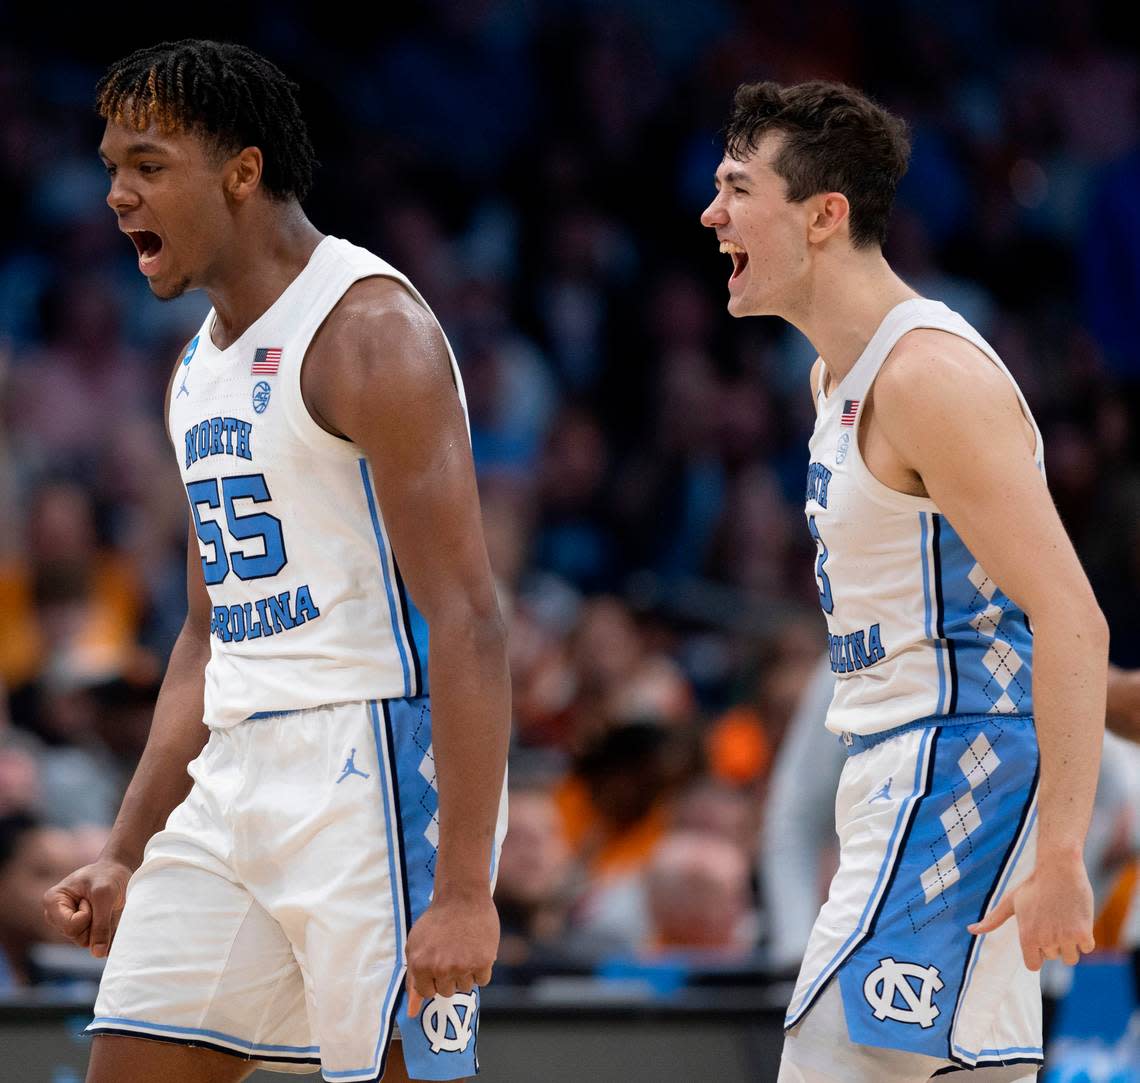 North Carolina’s Harrison Ingram (55) and Cormac Ryan (3) react after Ingram sank a three-point basket to secure a 69-57 lead over Michigan State in the second half on Saturday, March 23, 2024 in the second round of the NCAA Tournament at Spectrum Center in Charlotte, N.C.